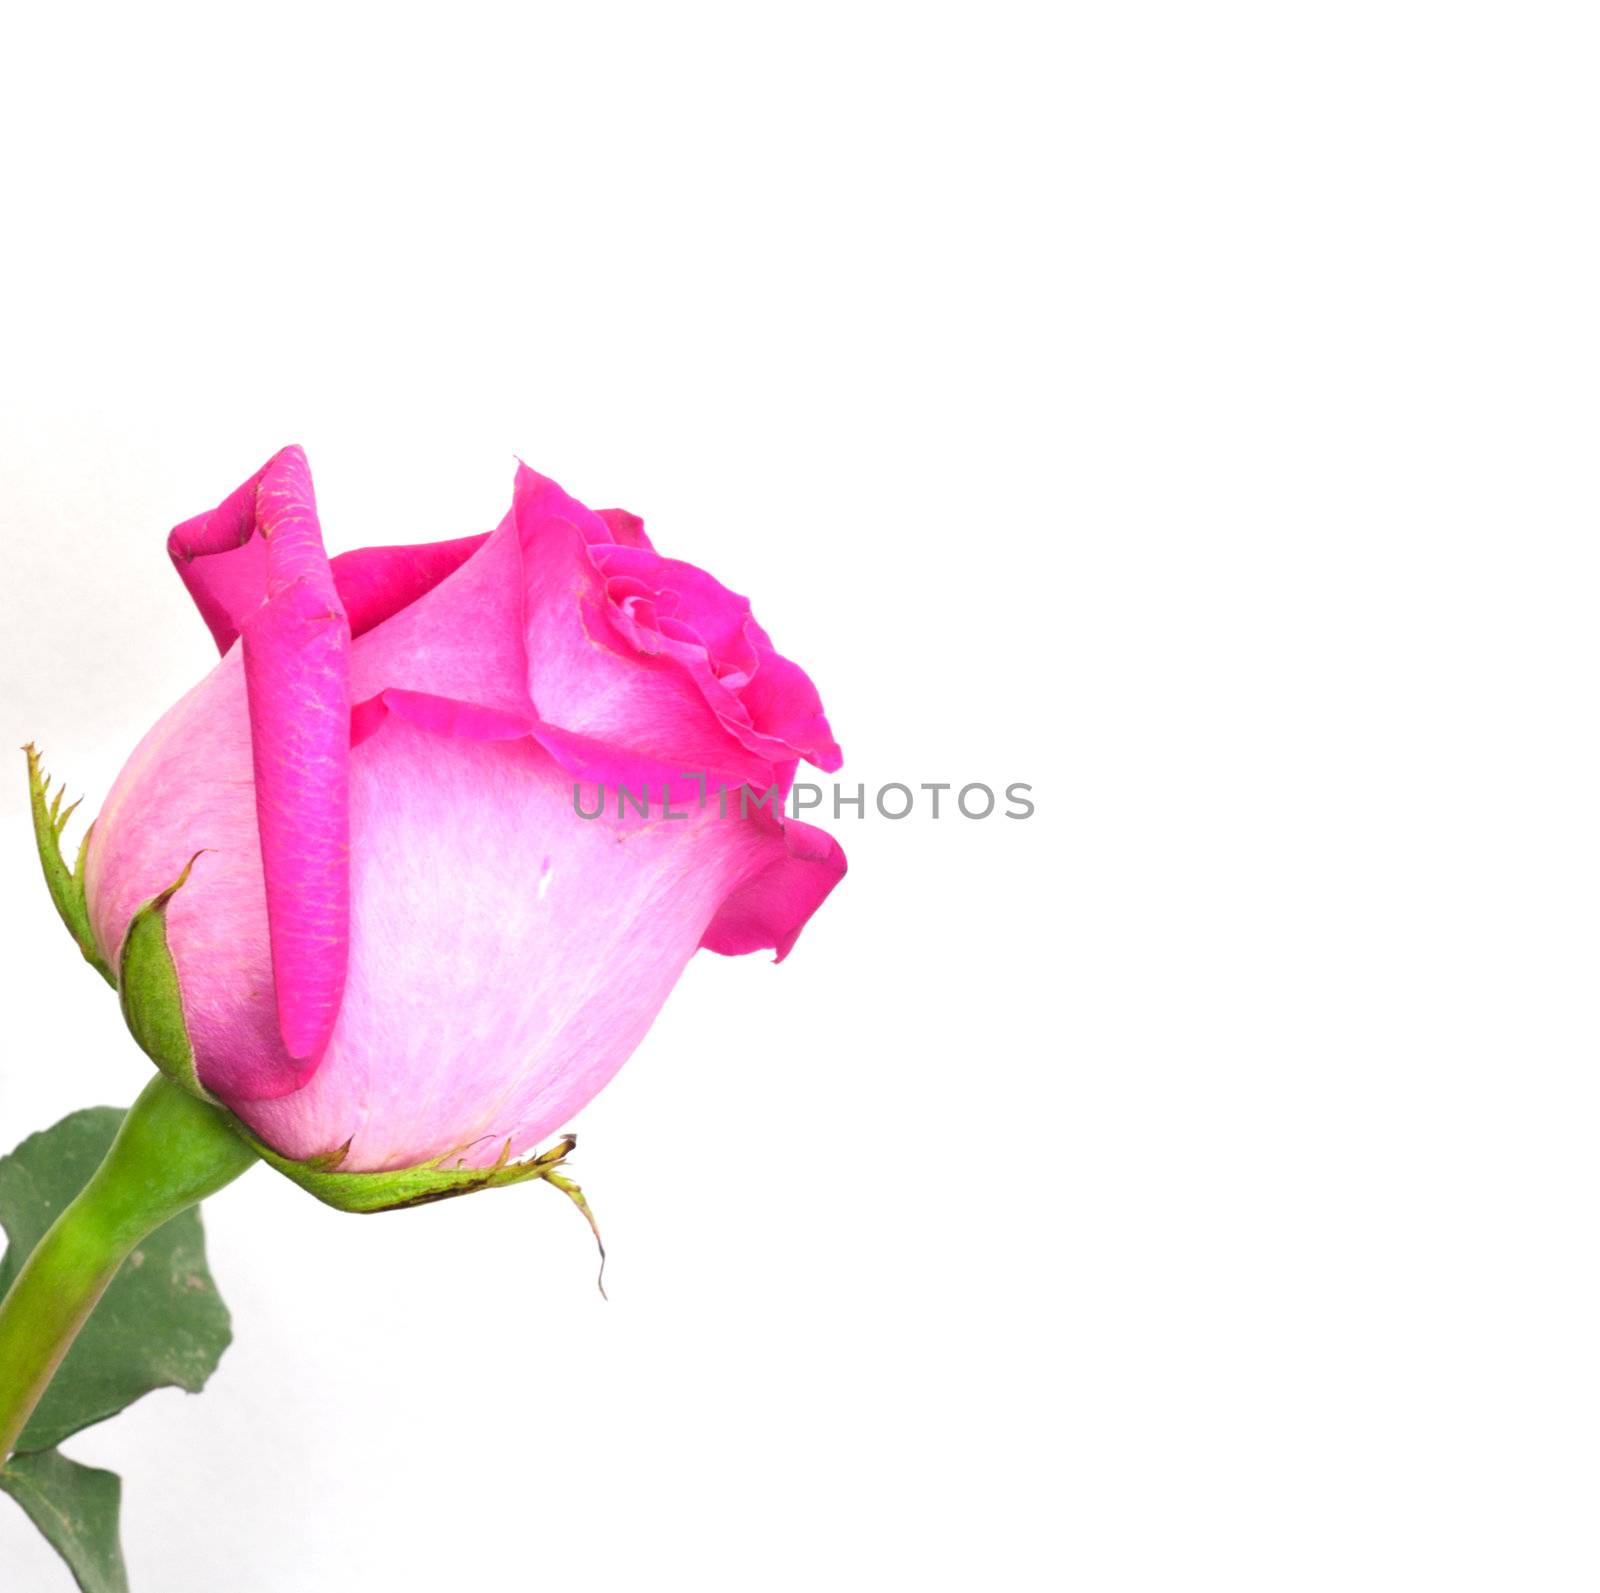 pink roses on a white background with space for text